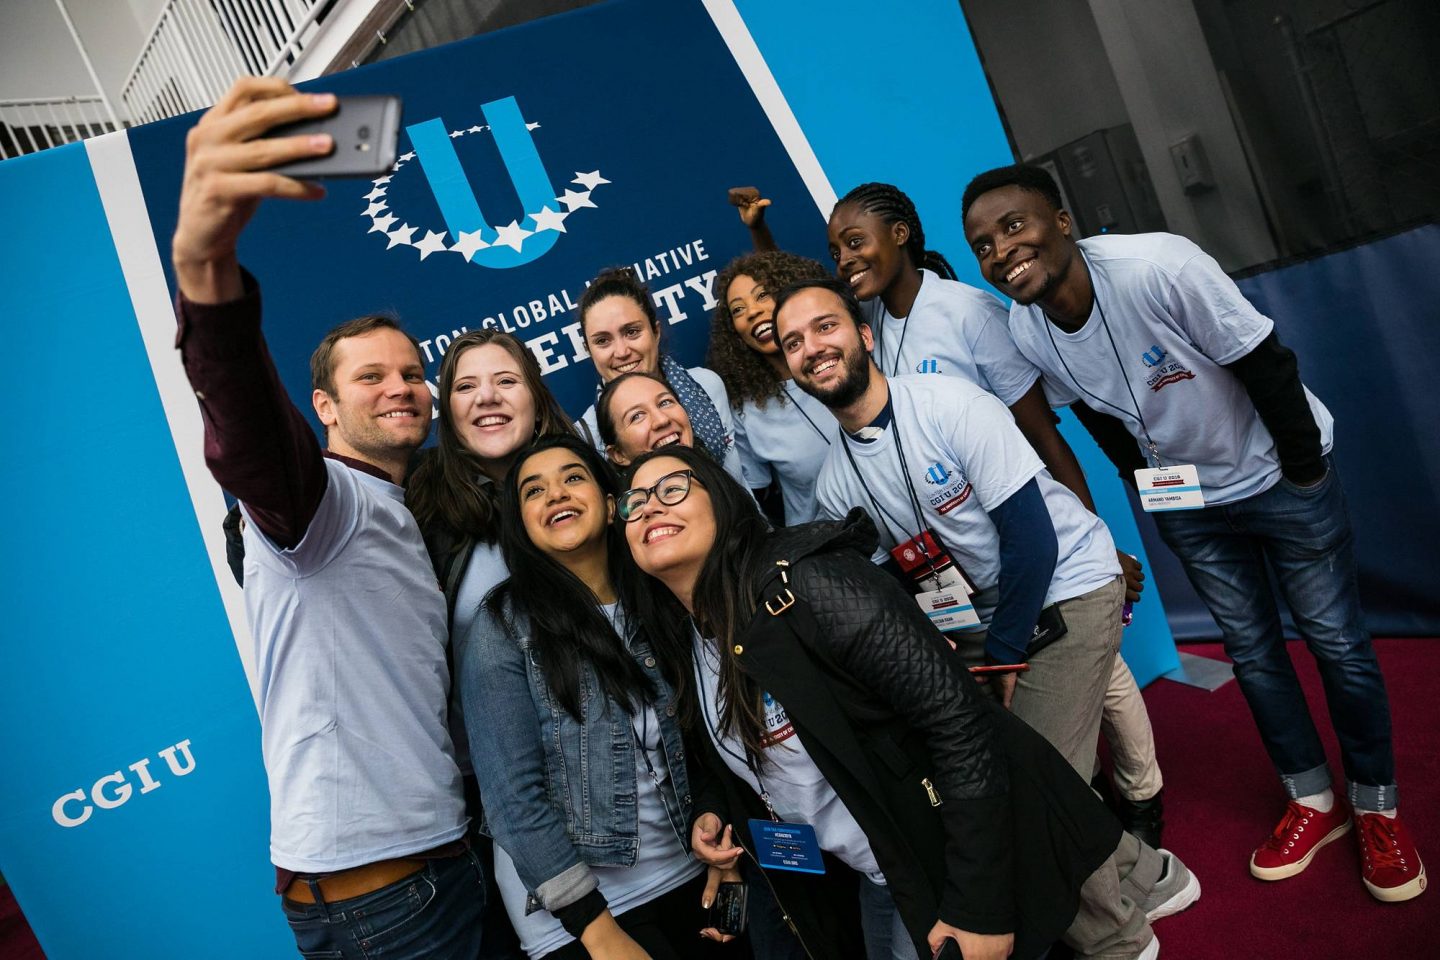 A group of students take a selfie together during a CGI U event